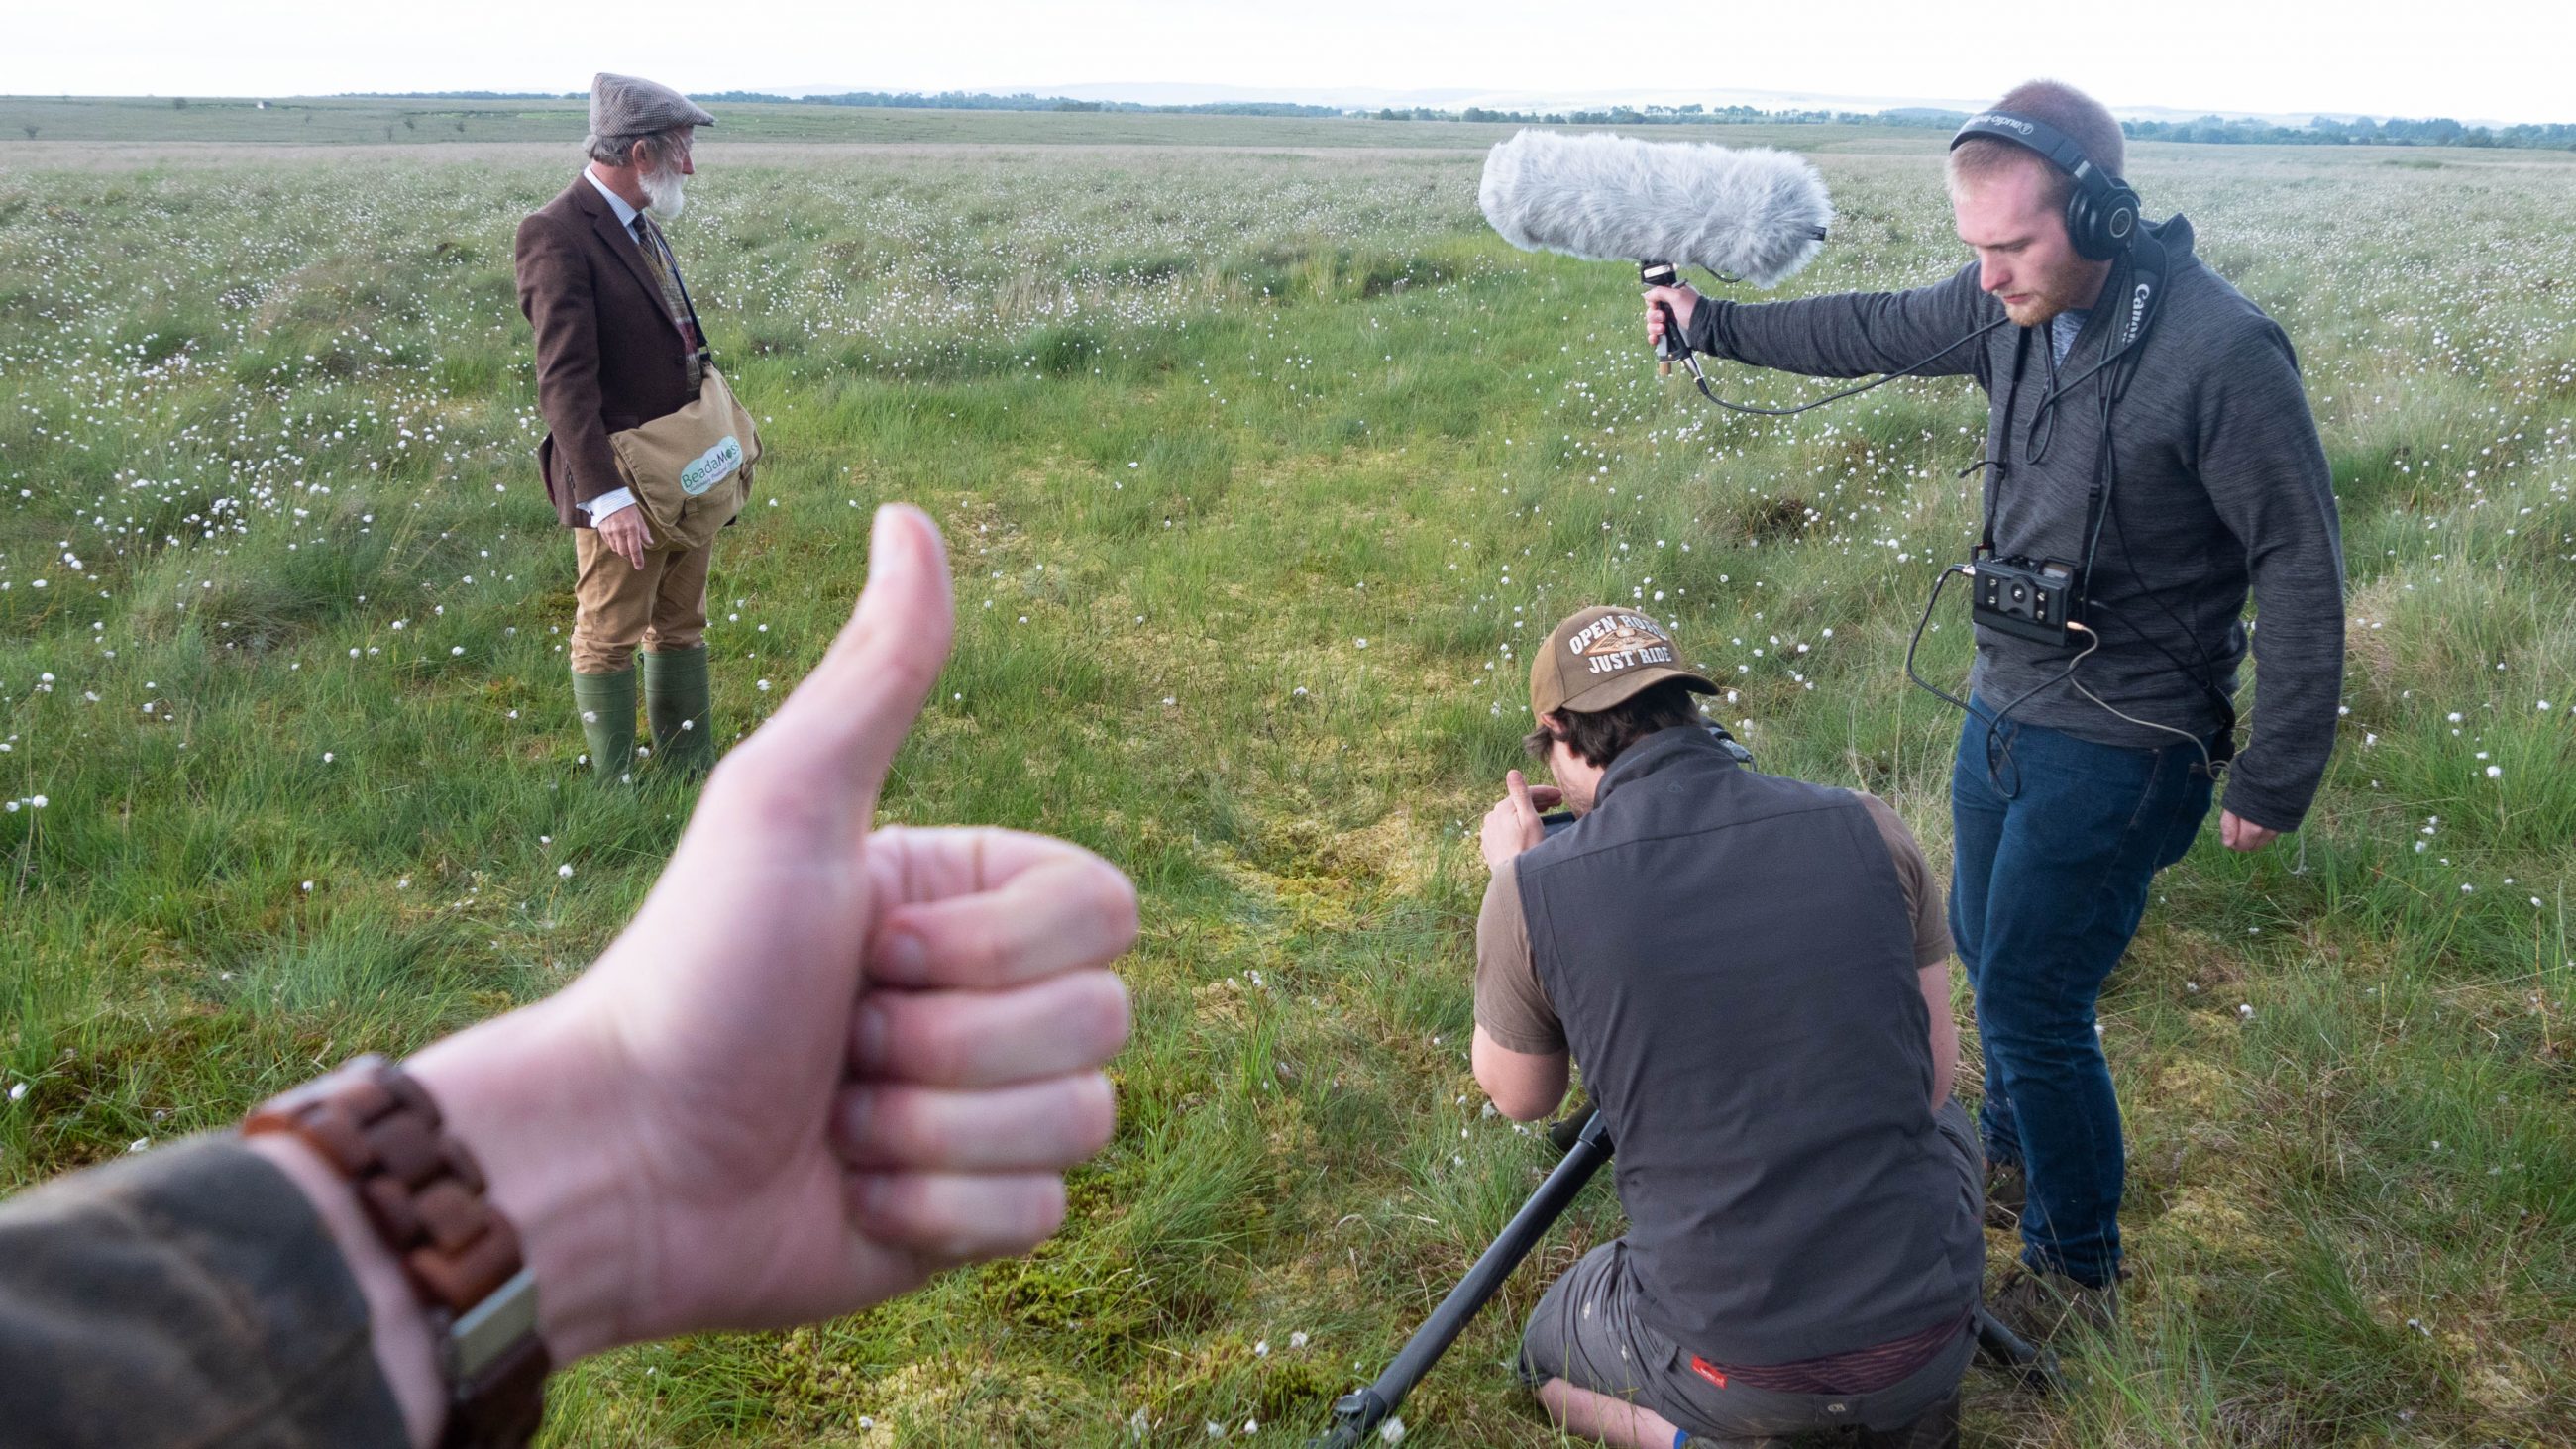 Filming in Fields - Behind the Scenes of Carbon Farmer with Andy Clark, Peter Baumann, Benjamin Sadd and Melvyn Rawlinson